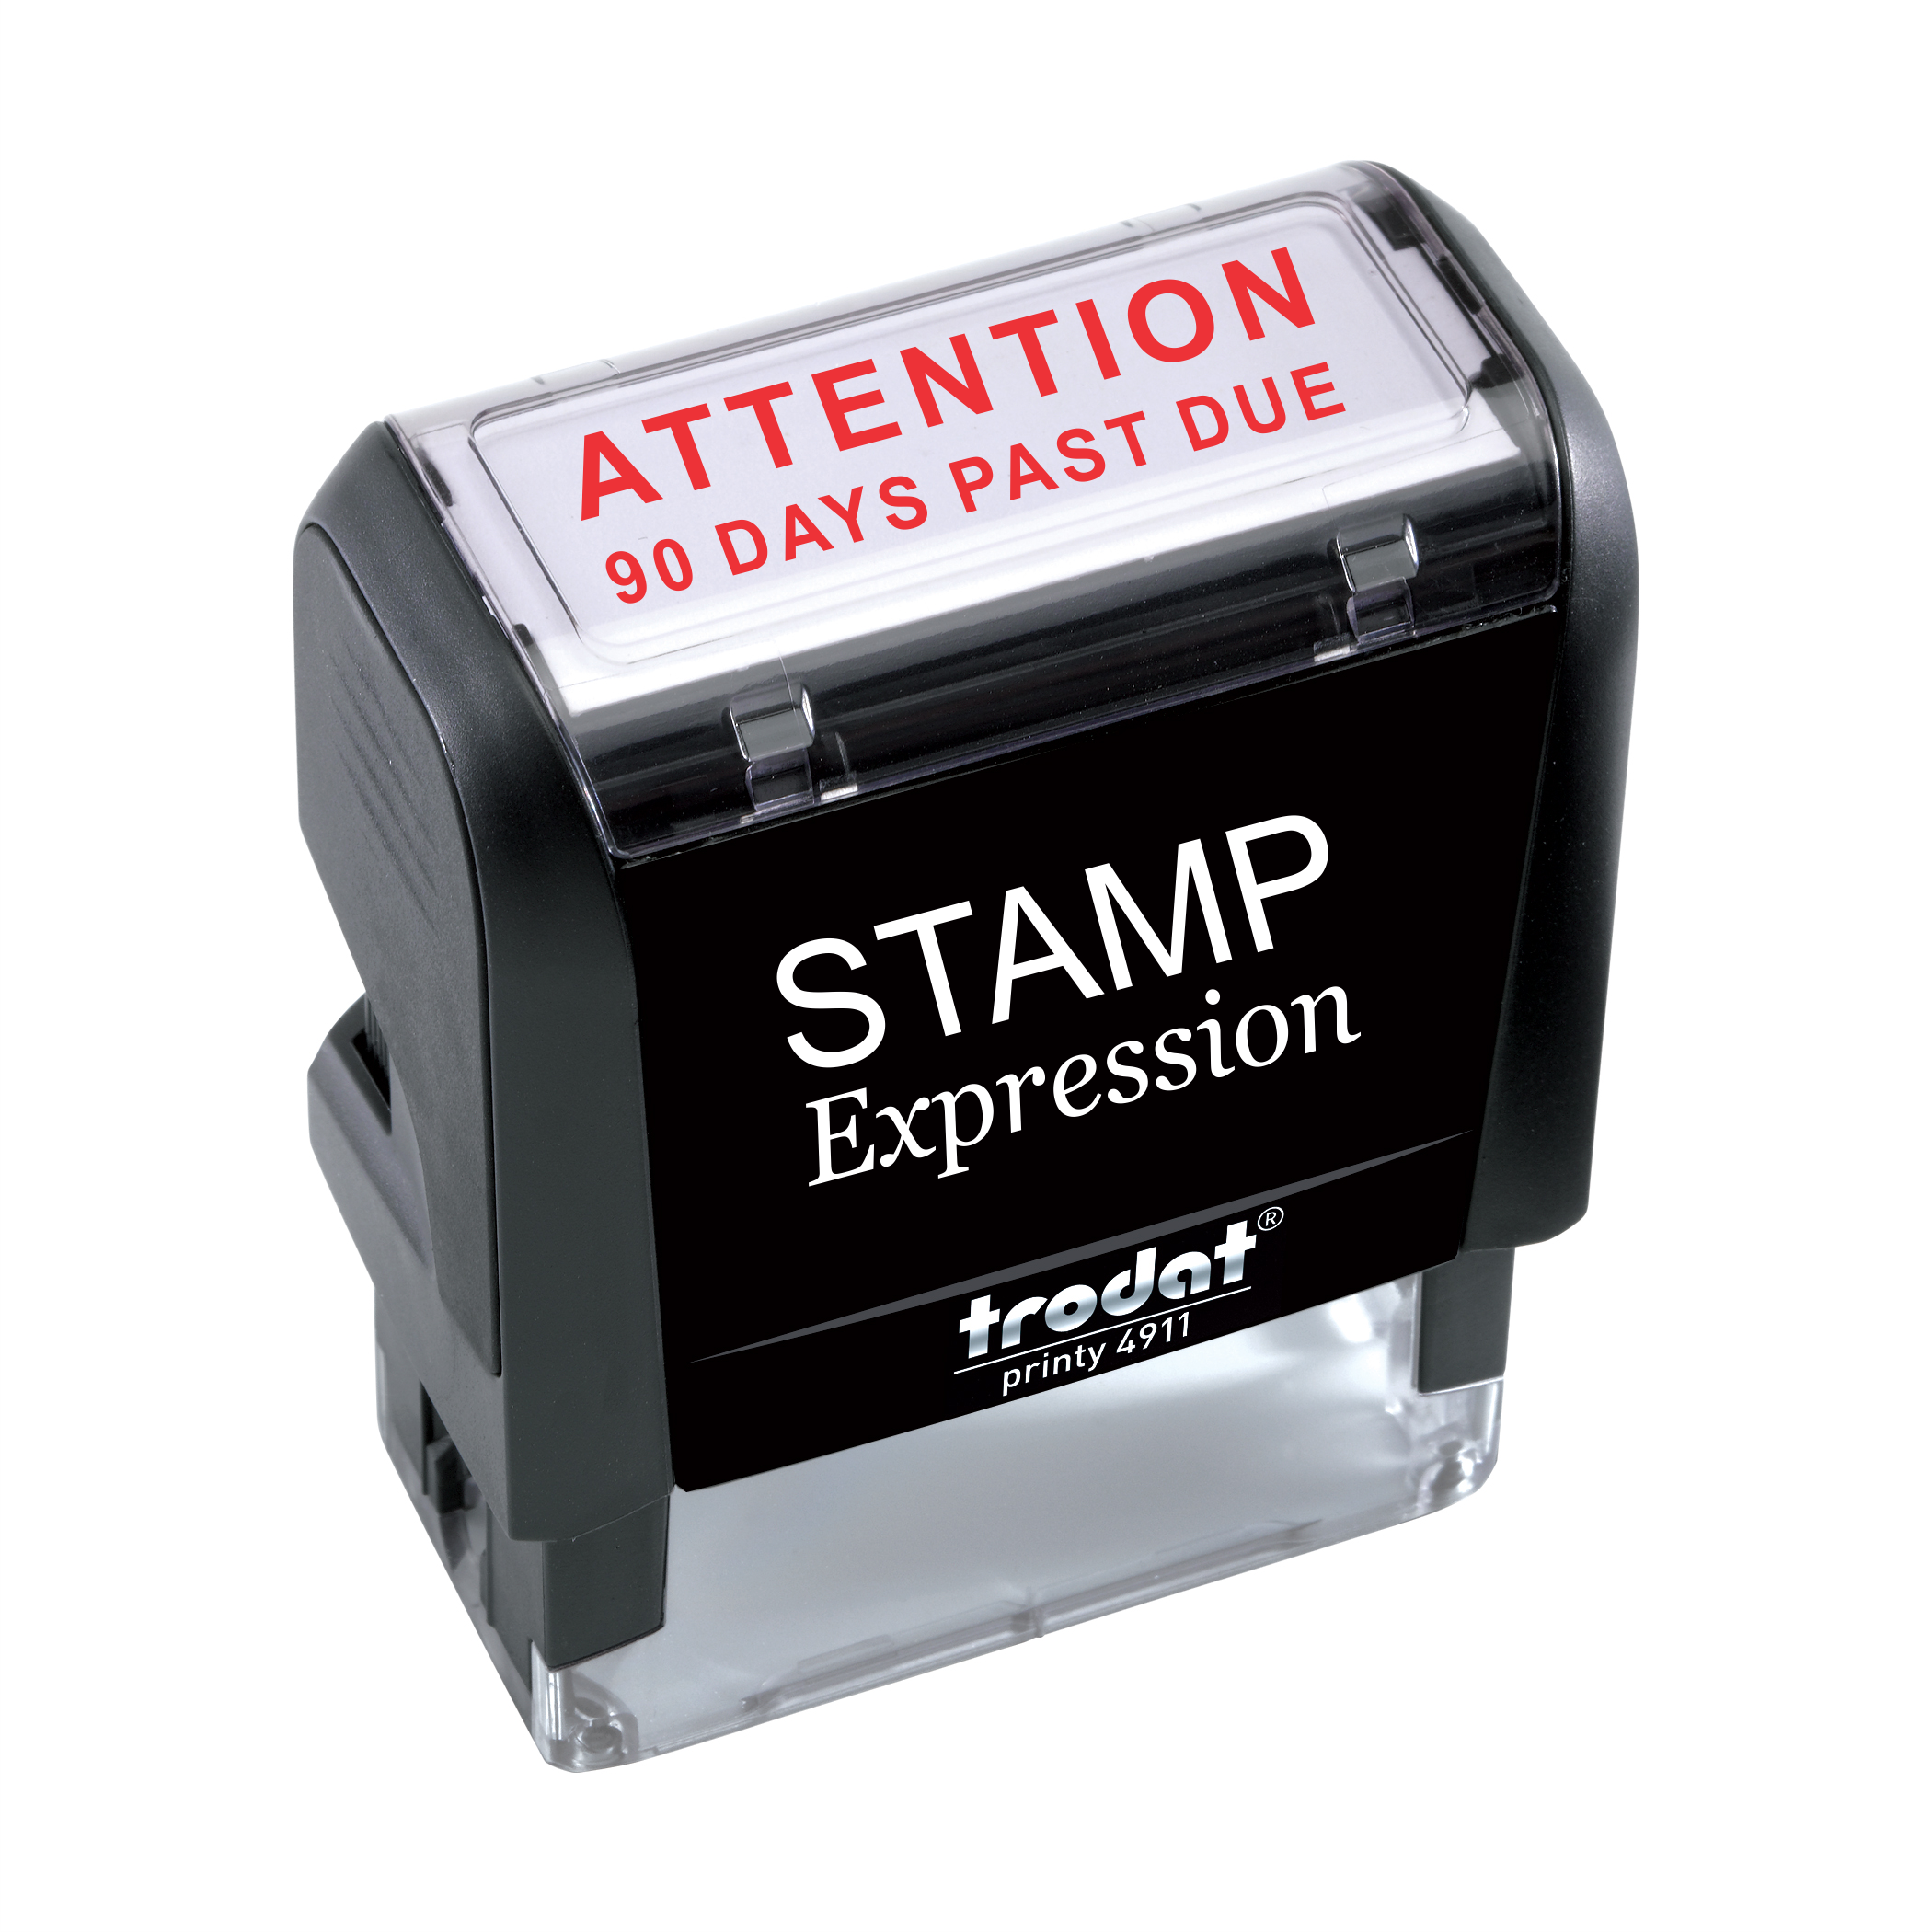 Attention 90 Days Past Due Office Self Inking Rubber Stamp